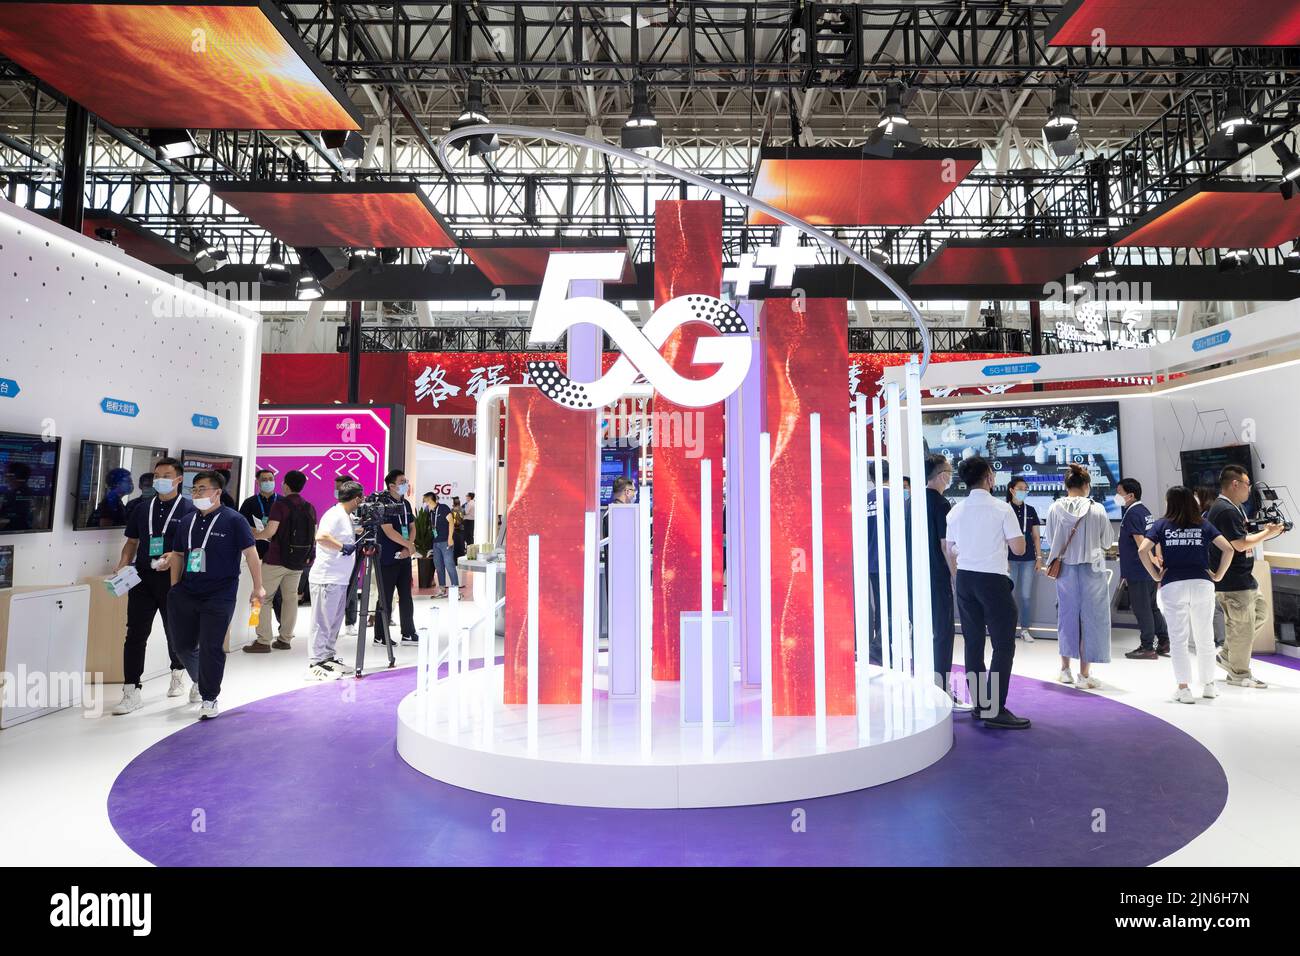 (220809) -- HARBIN, Aug. 9, 2022 (Xinhua) -- Staff members work at an exhibition booth during a media preview of the 2022 World 5G Convention in Harbin, capital of northeast China's Heilongjiang Province, Aug. 9, 2022. The 2022 World 5G Convention will be held here from August 10 to 12. (Xinhua/Zhang Tao) Stock Photo